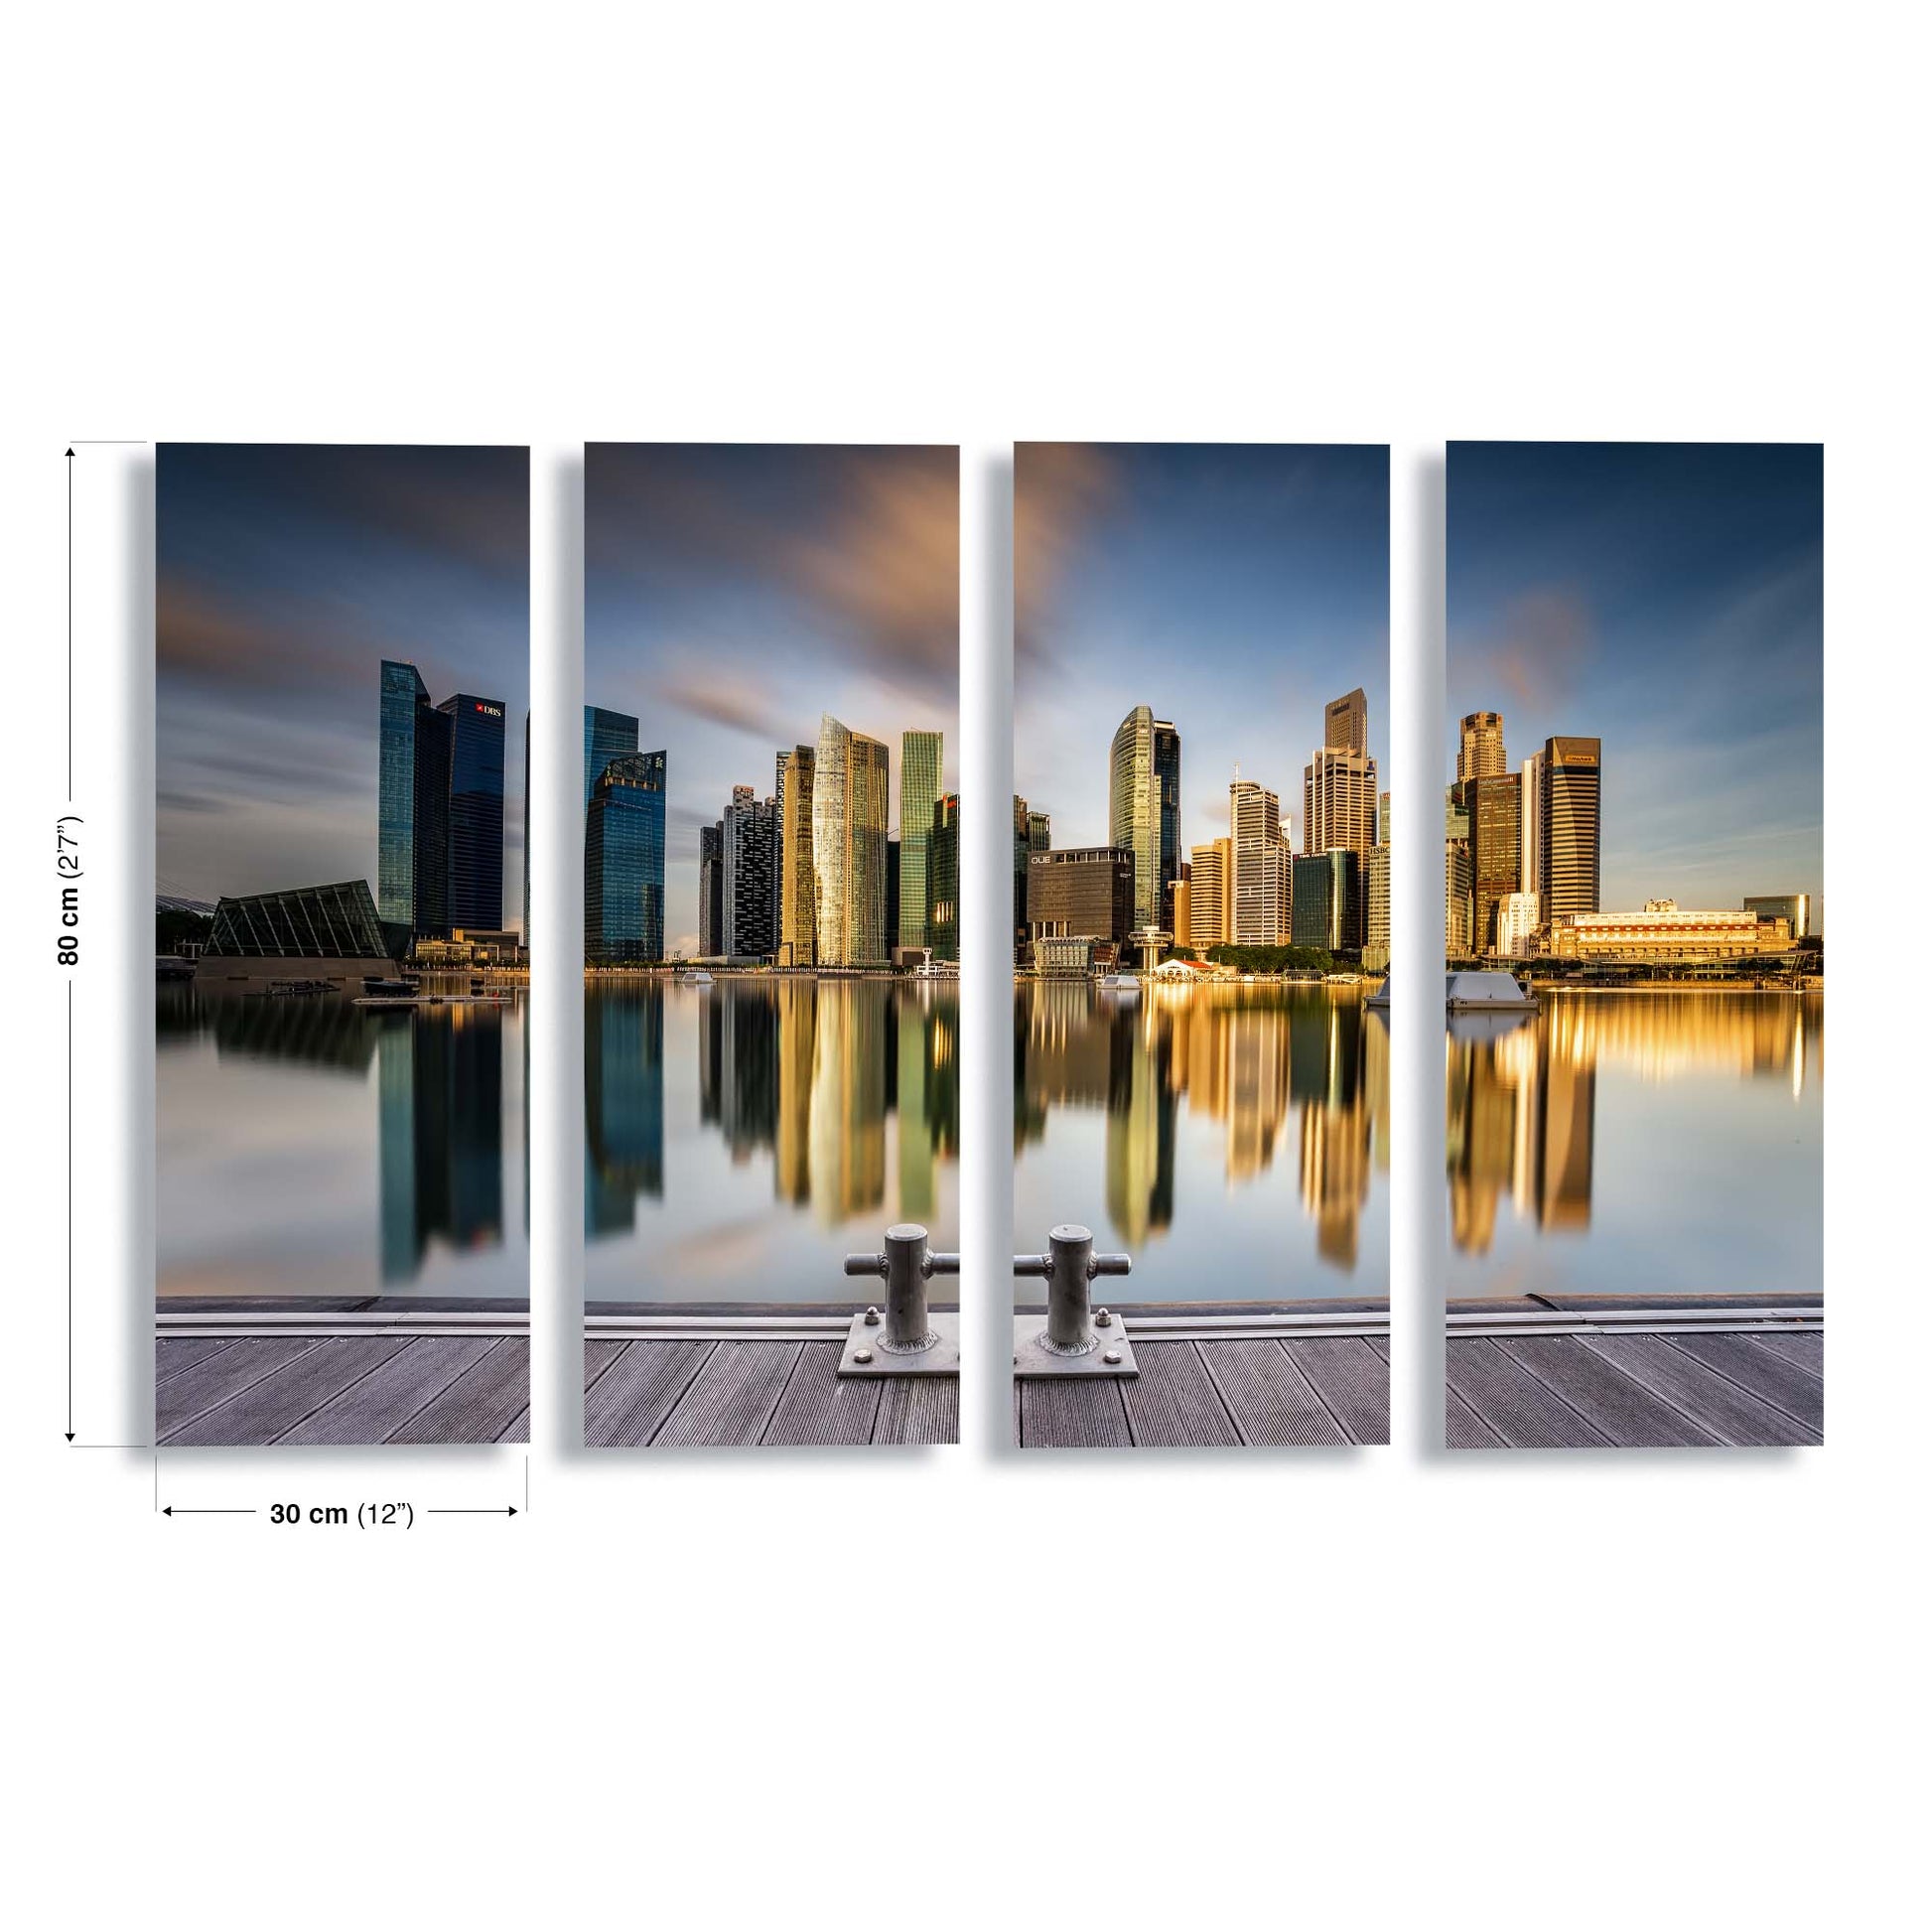 Golden Morning in SIngapore by Zexsen Xie Canvas Print - USTAD HOME